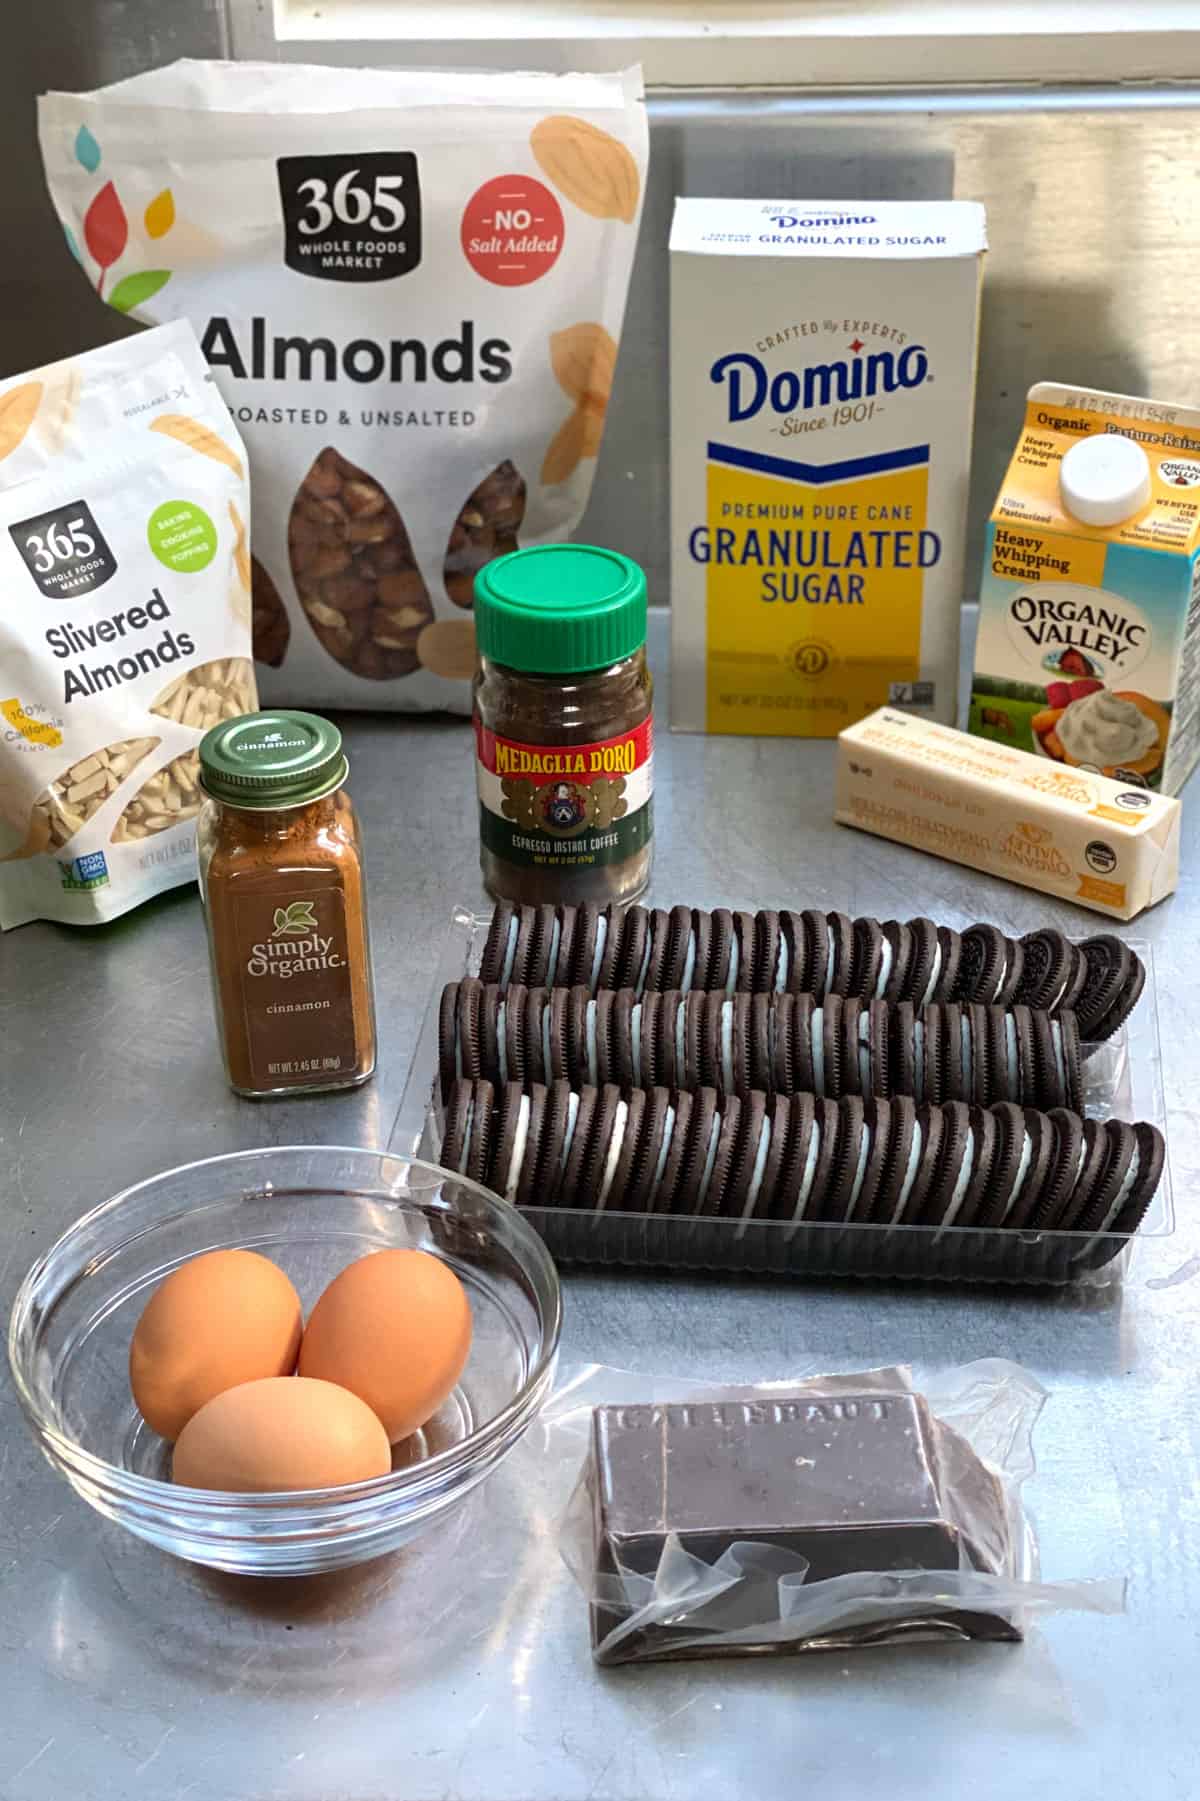 ingredients for frozen mocha cream pie with cookie crumb crust: a container of heavy cream, a pack of Oreos, a box of white sugar, a jar of cinnamon, a bag of whole almond, bag of slivered almonds bar of butter and container of instant coffee, and a block of chocolate